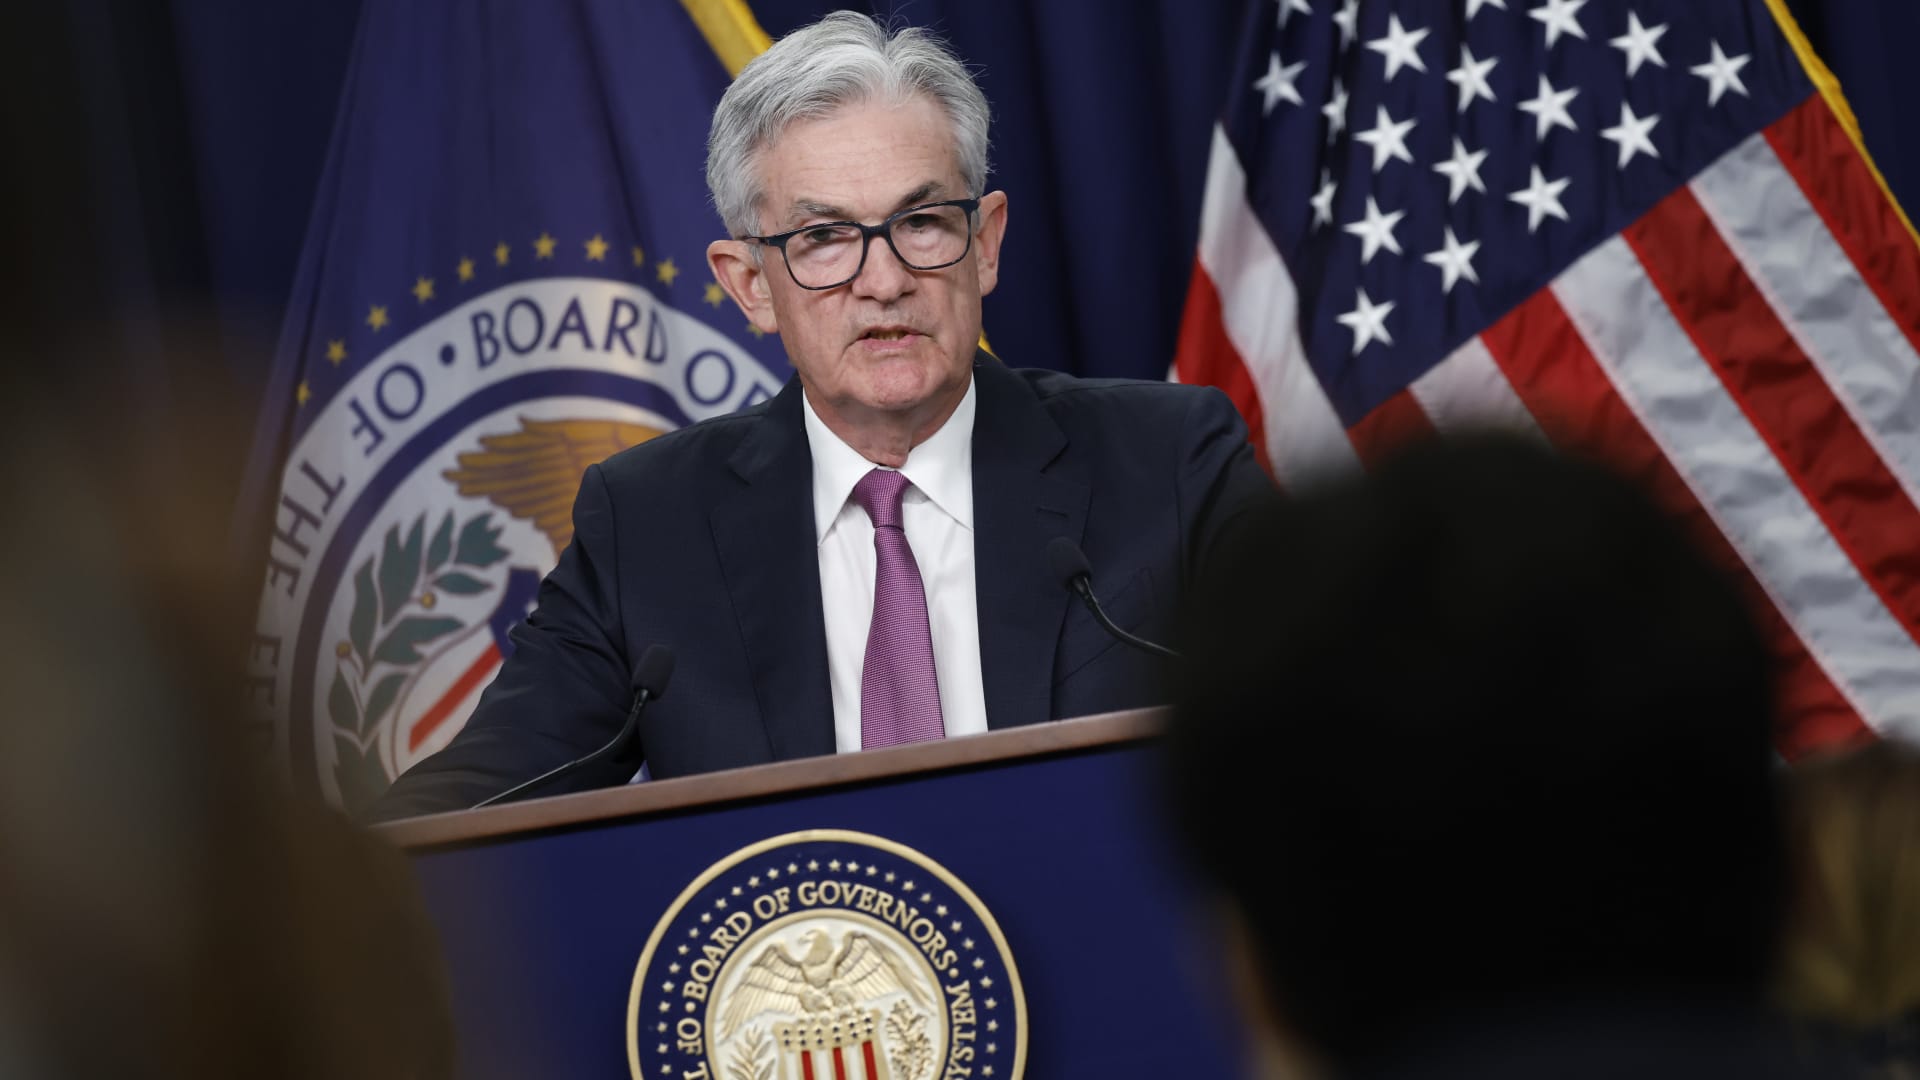 Fed Chair Jerome Powell said he does not think the U.S. is currently in a recession